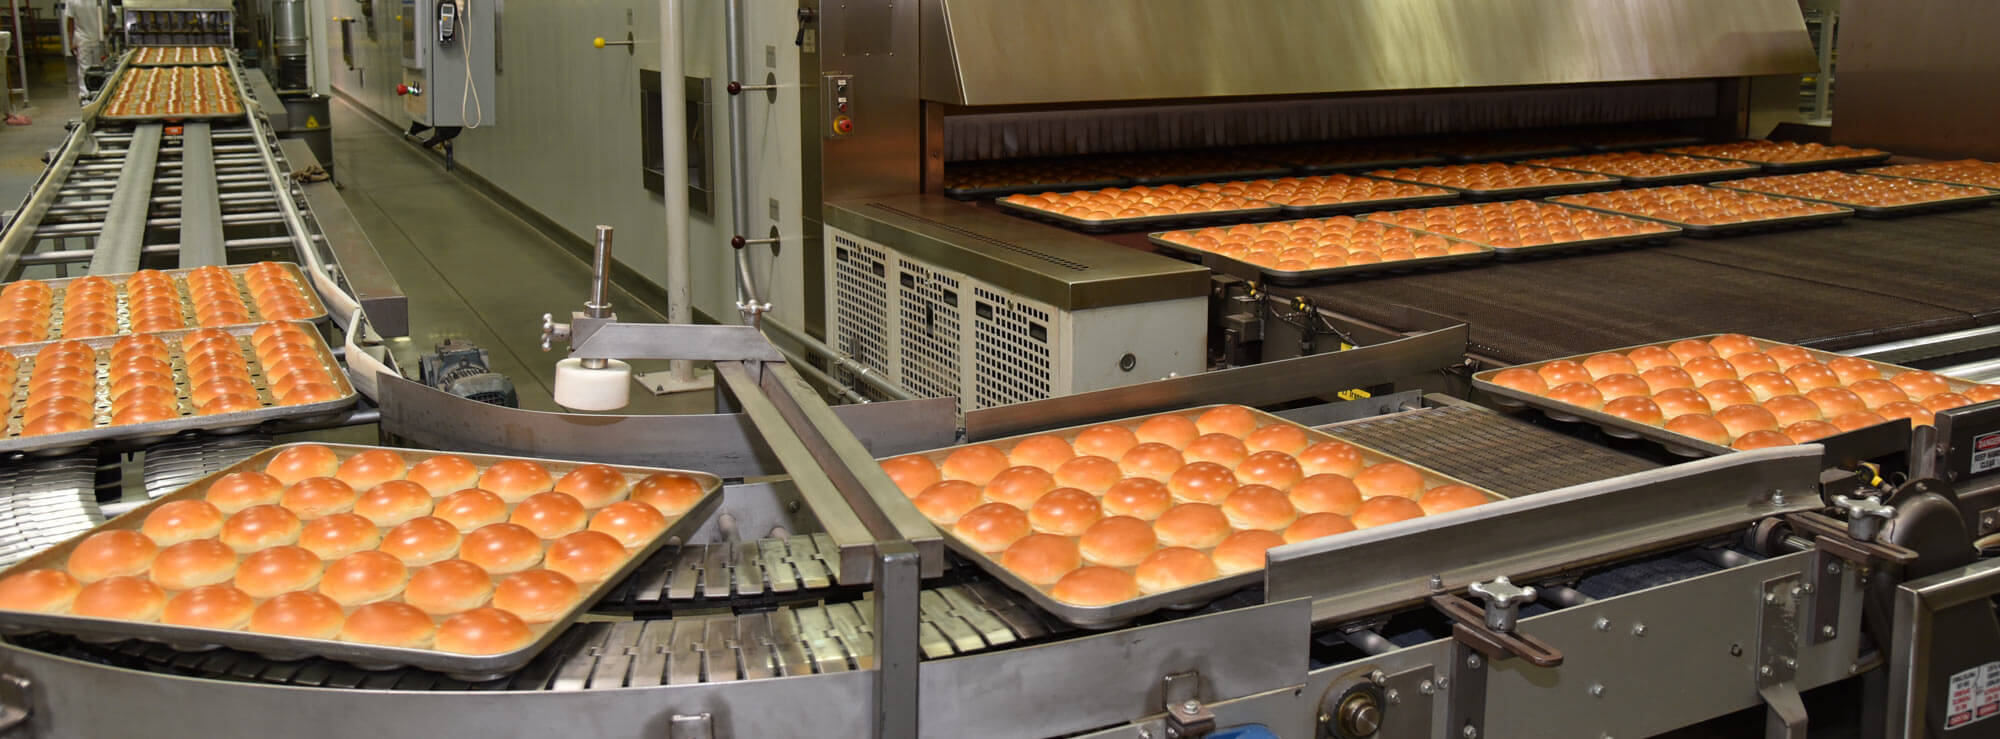 Bakery Products Market Industry